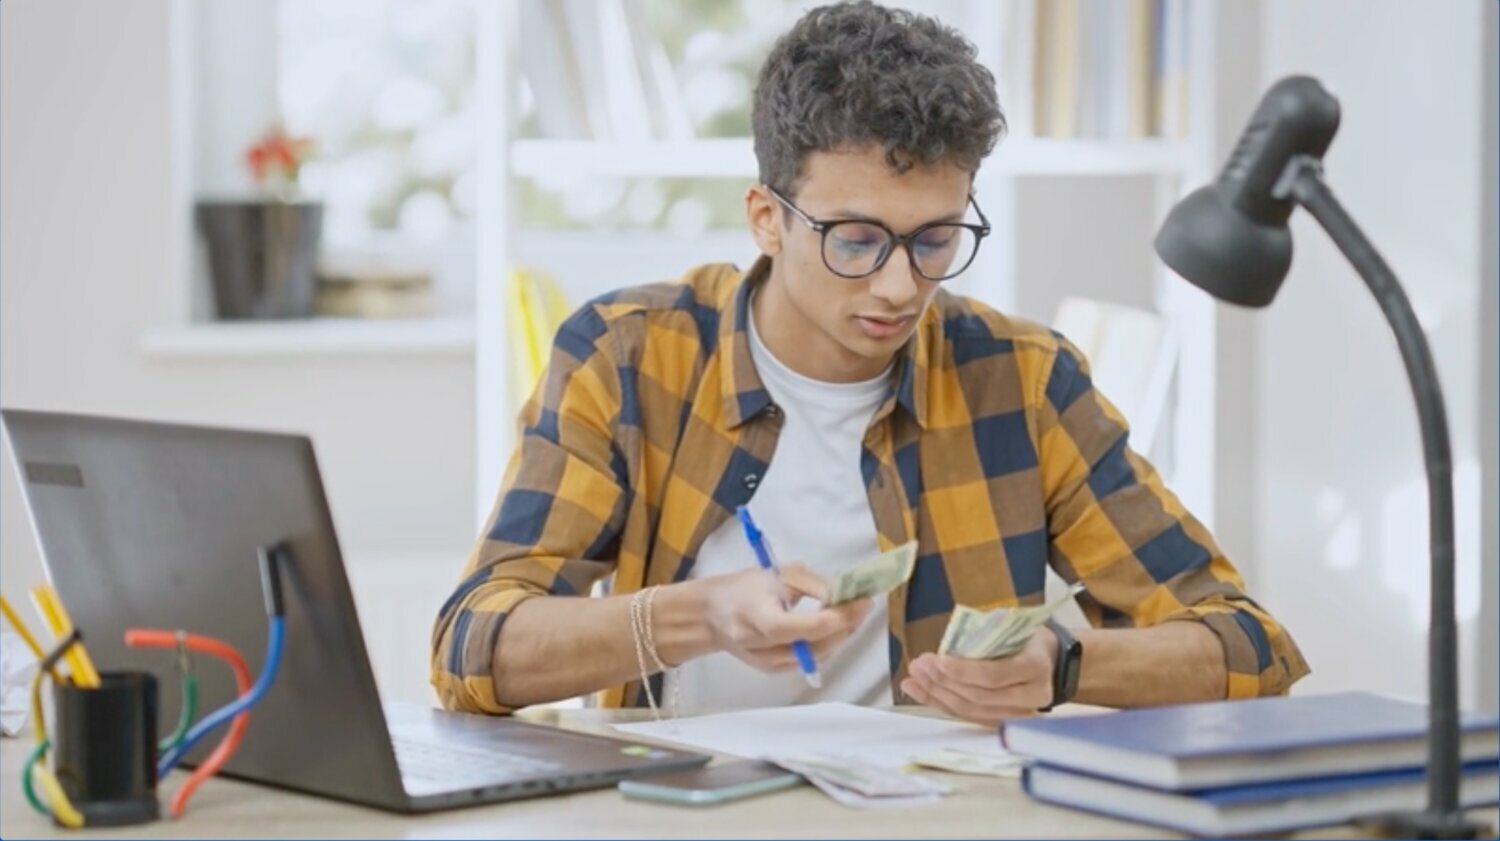 Teaching personal finance in high school has immediate benefits: Students learn to save more and spend less